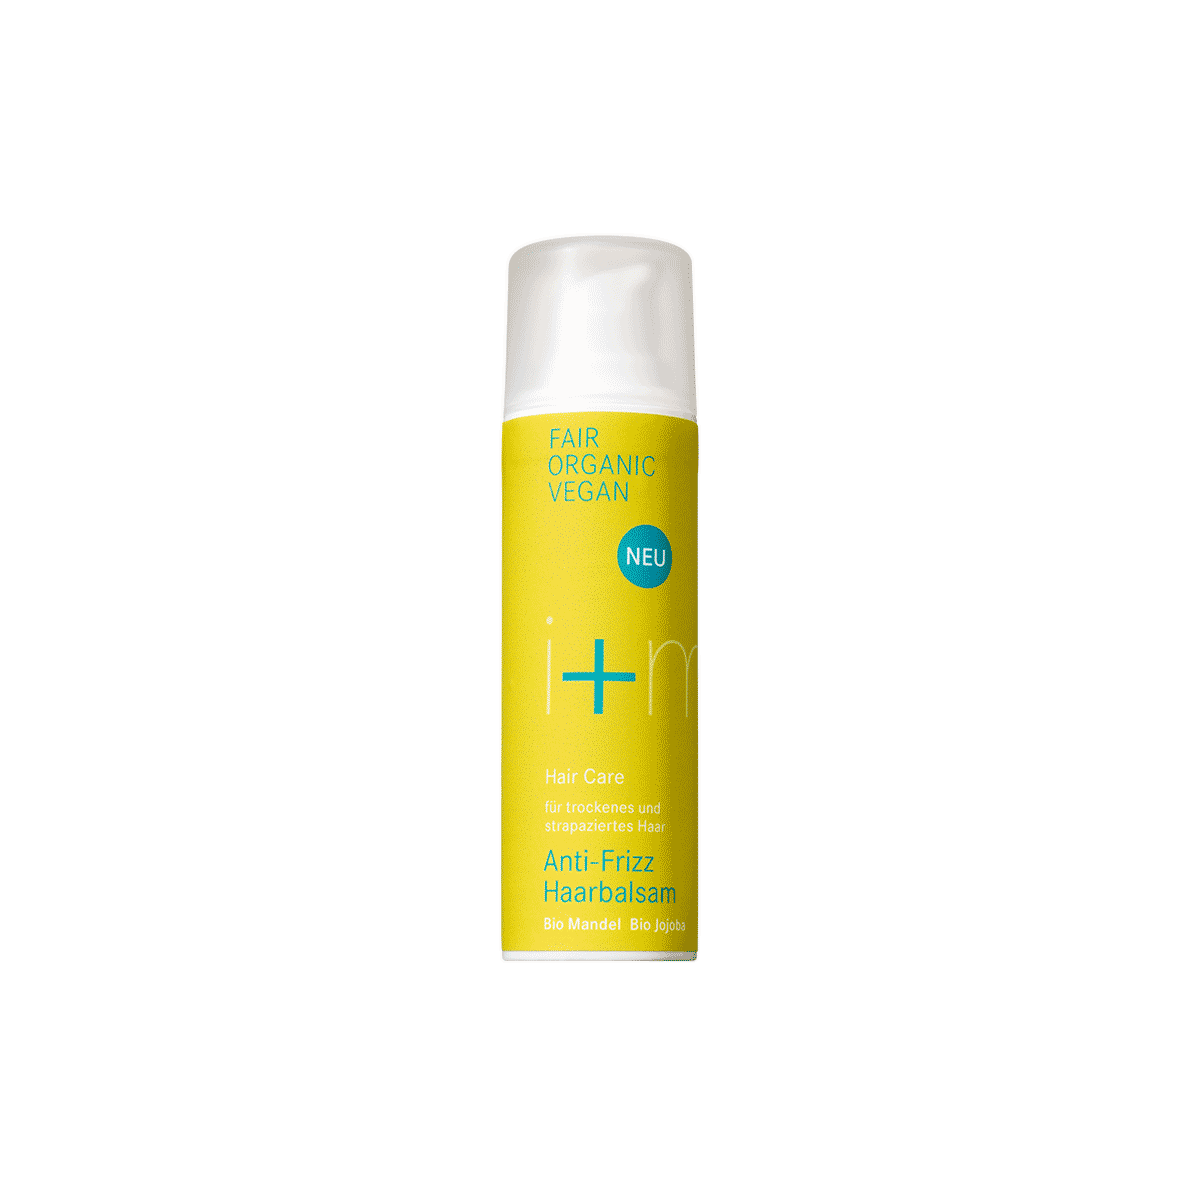 Anti Frizz Leave In Haarbalsam von i+m Hair Care